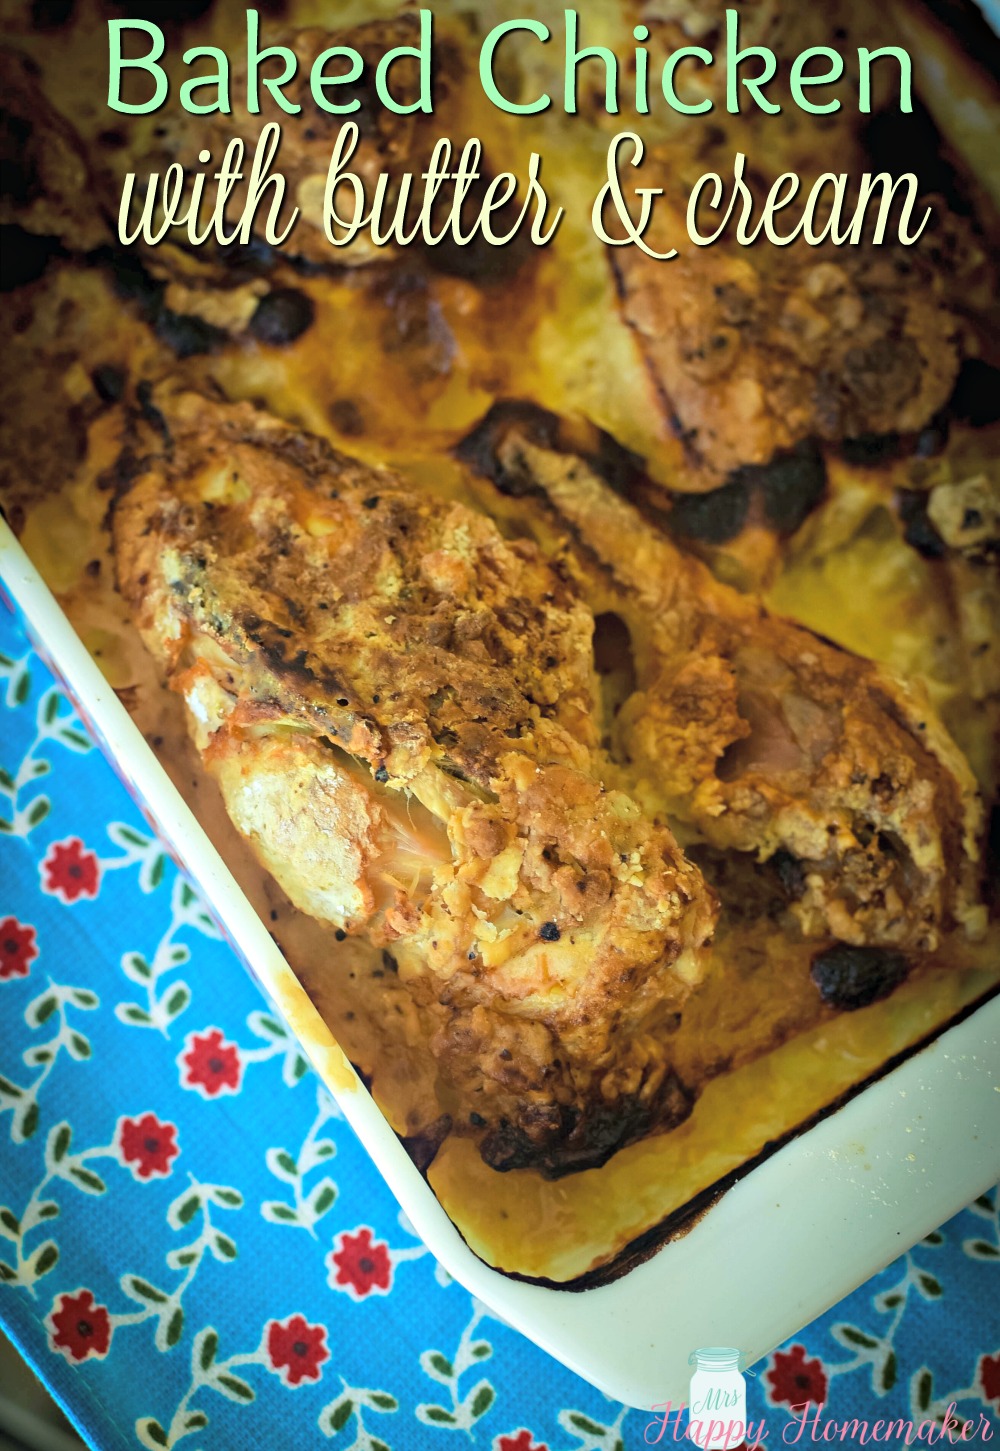 Baked Chicken with butter and cream